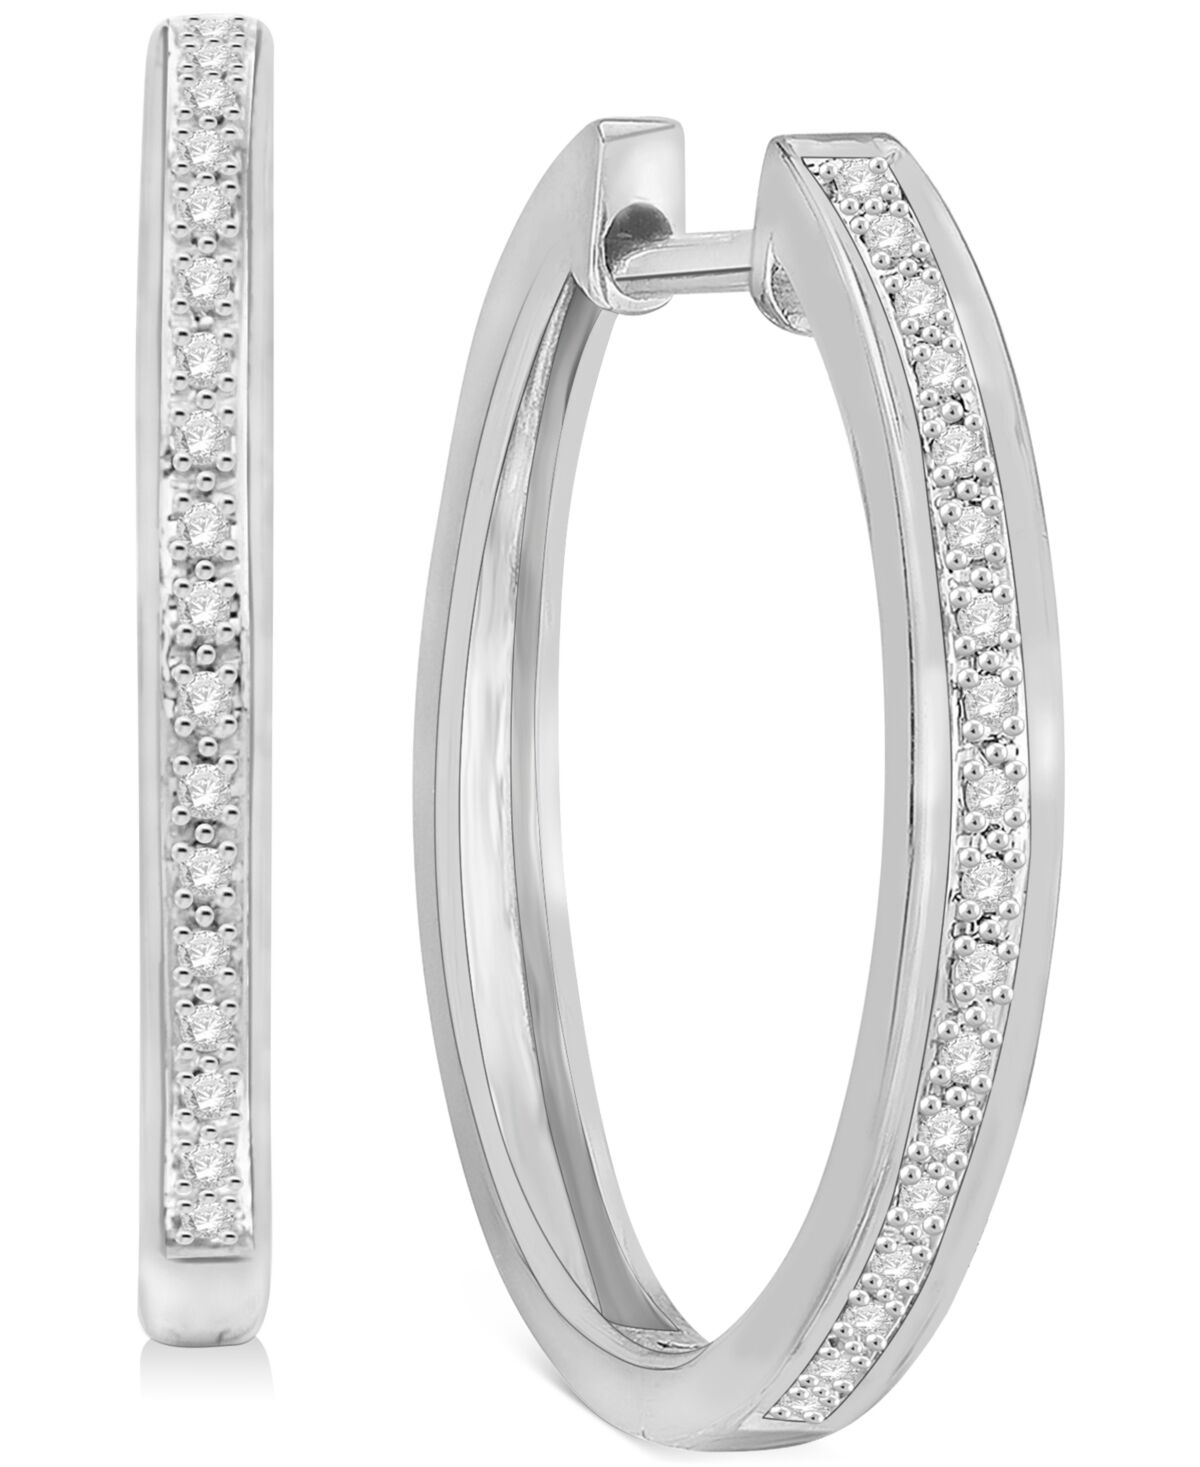 Macy's 3-Pc. Set Diamond Small Hoop Earrings (1/3 ct. t.w.) in Sterling Silver, Gold-Plate & Rose Gold-Plate - Sterling Silver